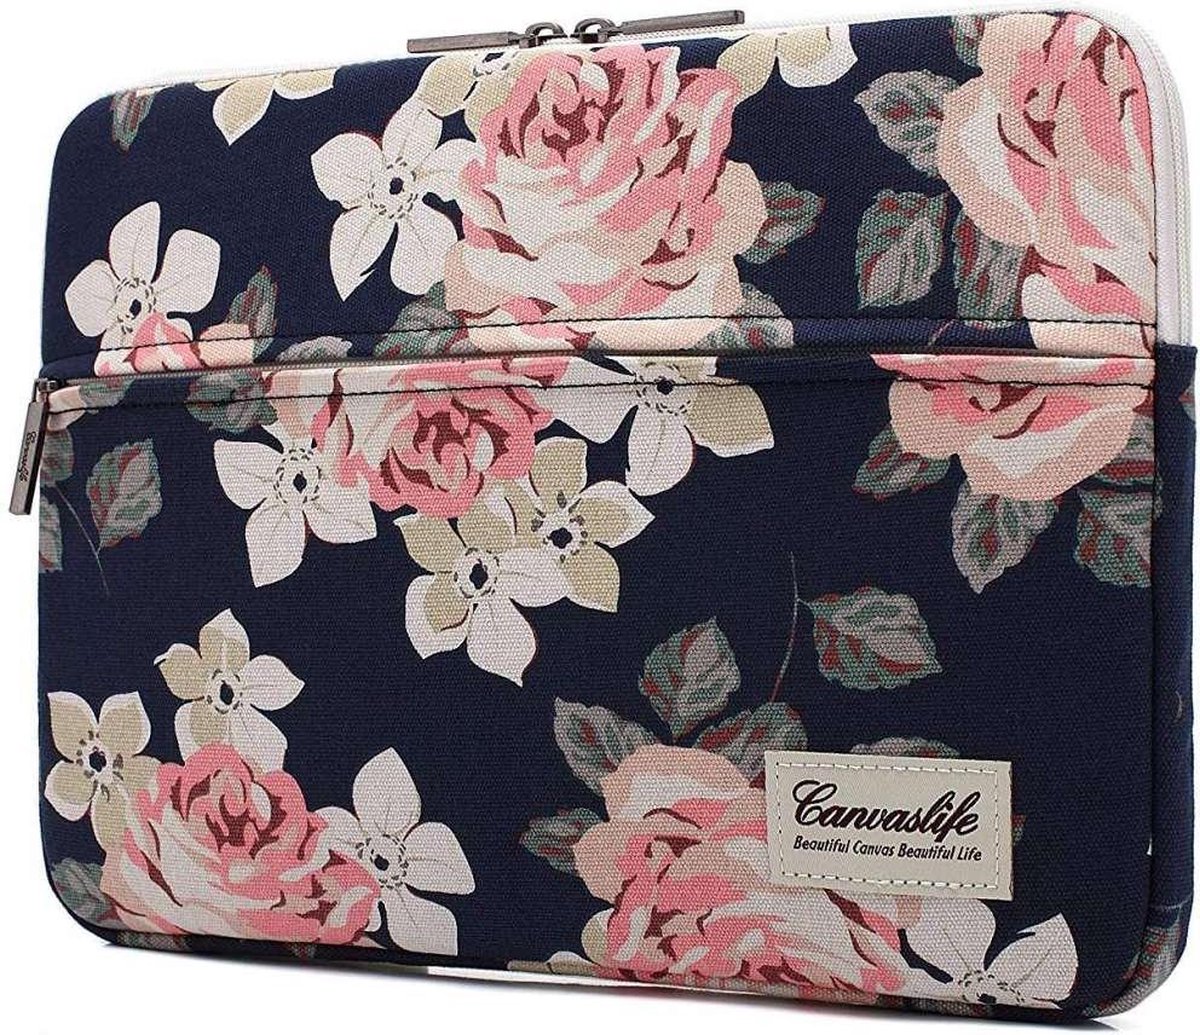 Canvaslife MacBook Air/Pro Sleeve 13 inch - Navy Rose